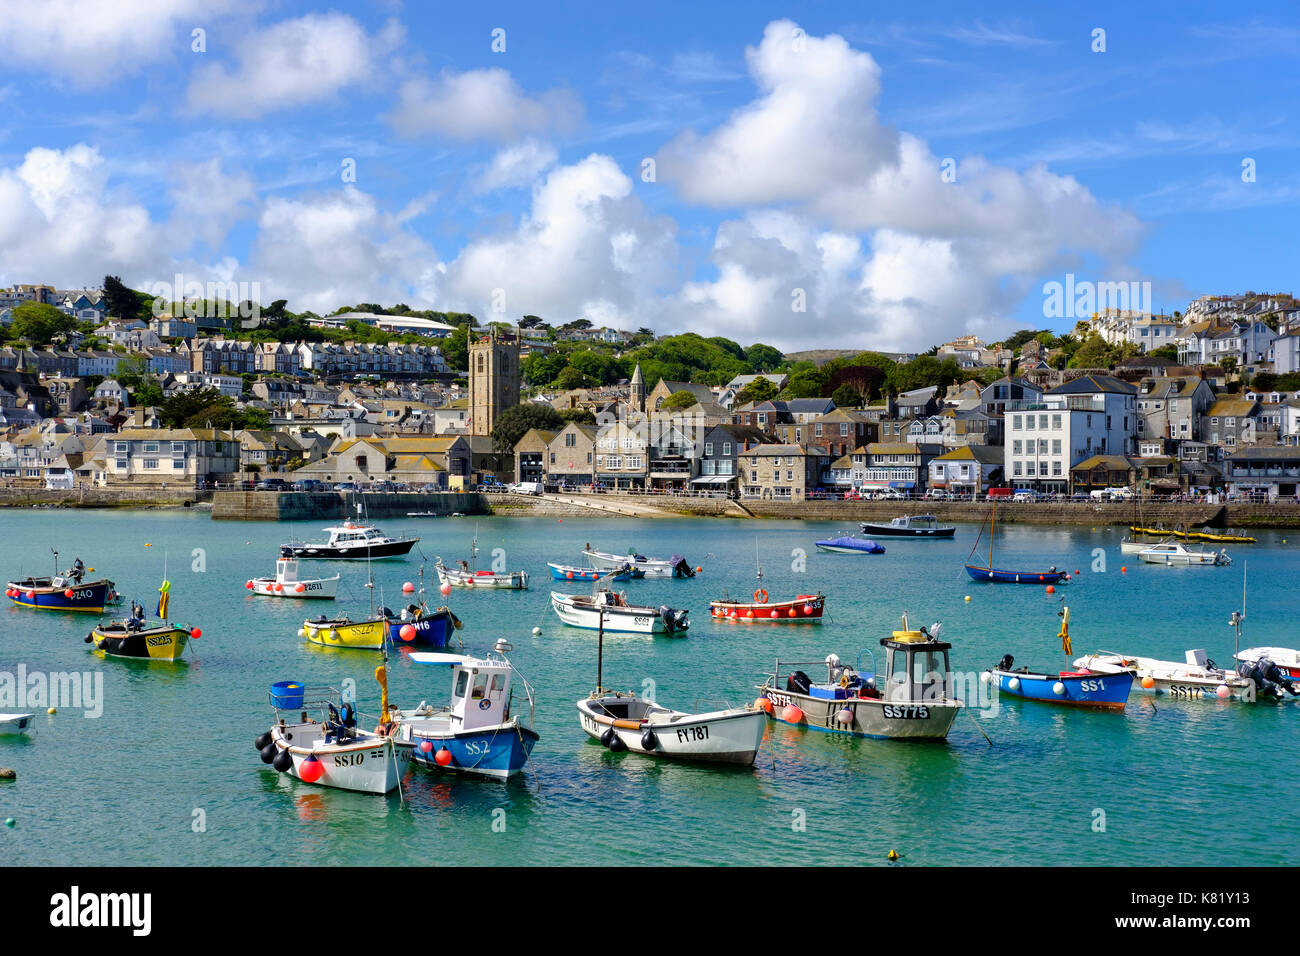 Fishing port, St Ives, Cornwall, England, Great Britain Stock Photo